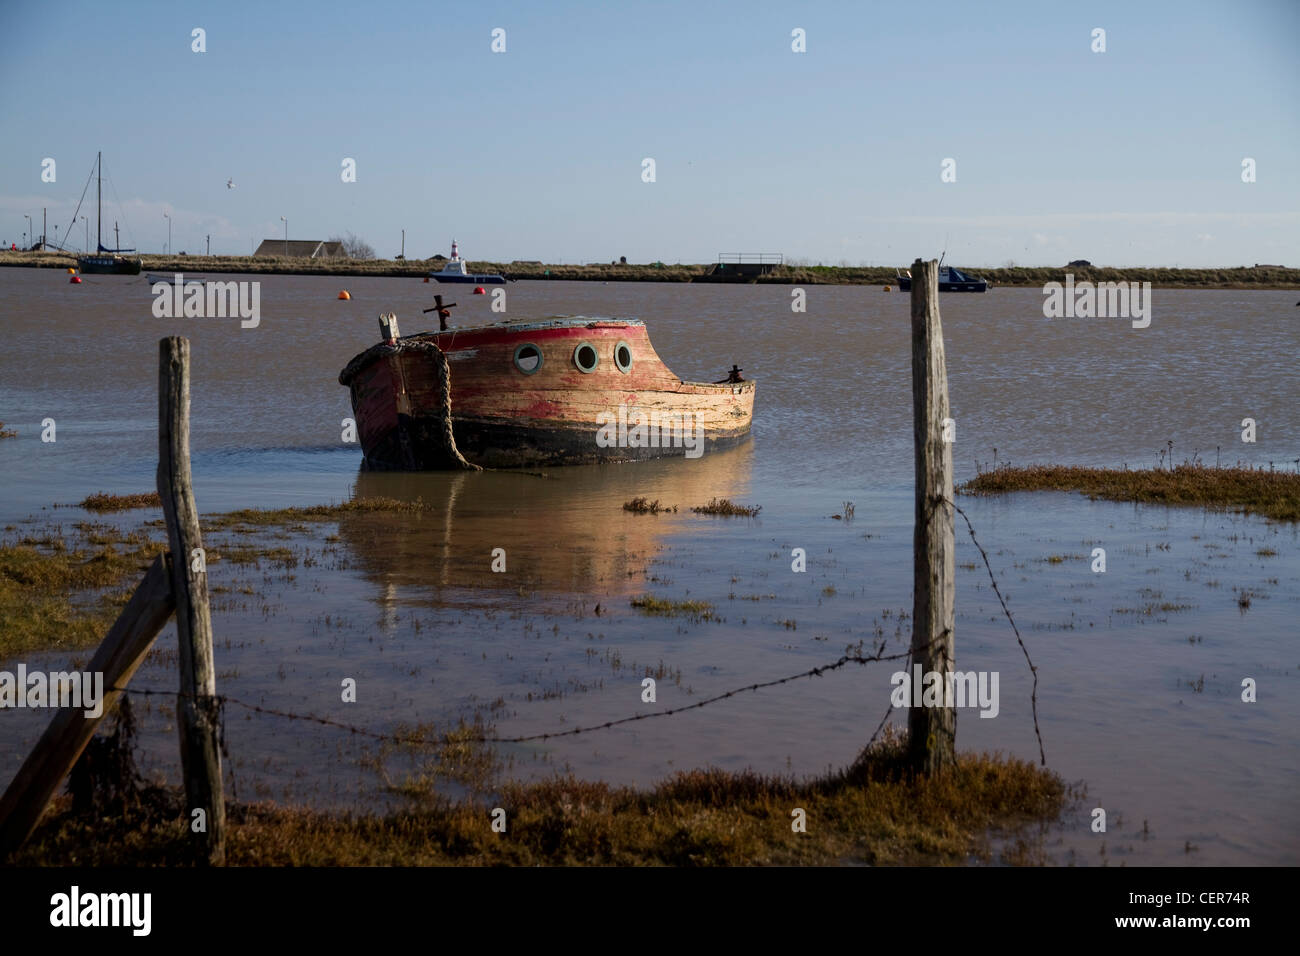 An old, abandoned boat in the harbour at Orford, Suffolk, England, with Orford Ness in the background Stock Photo